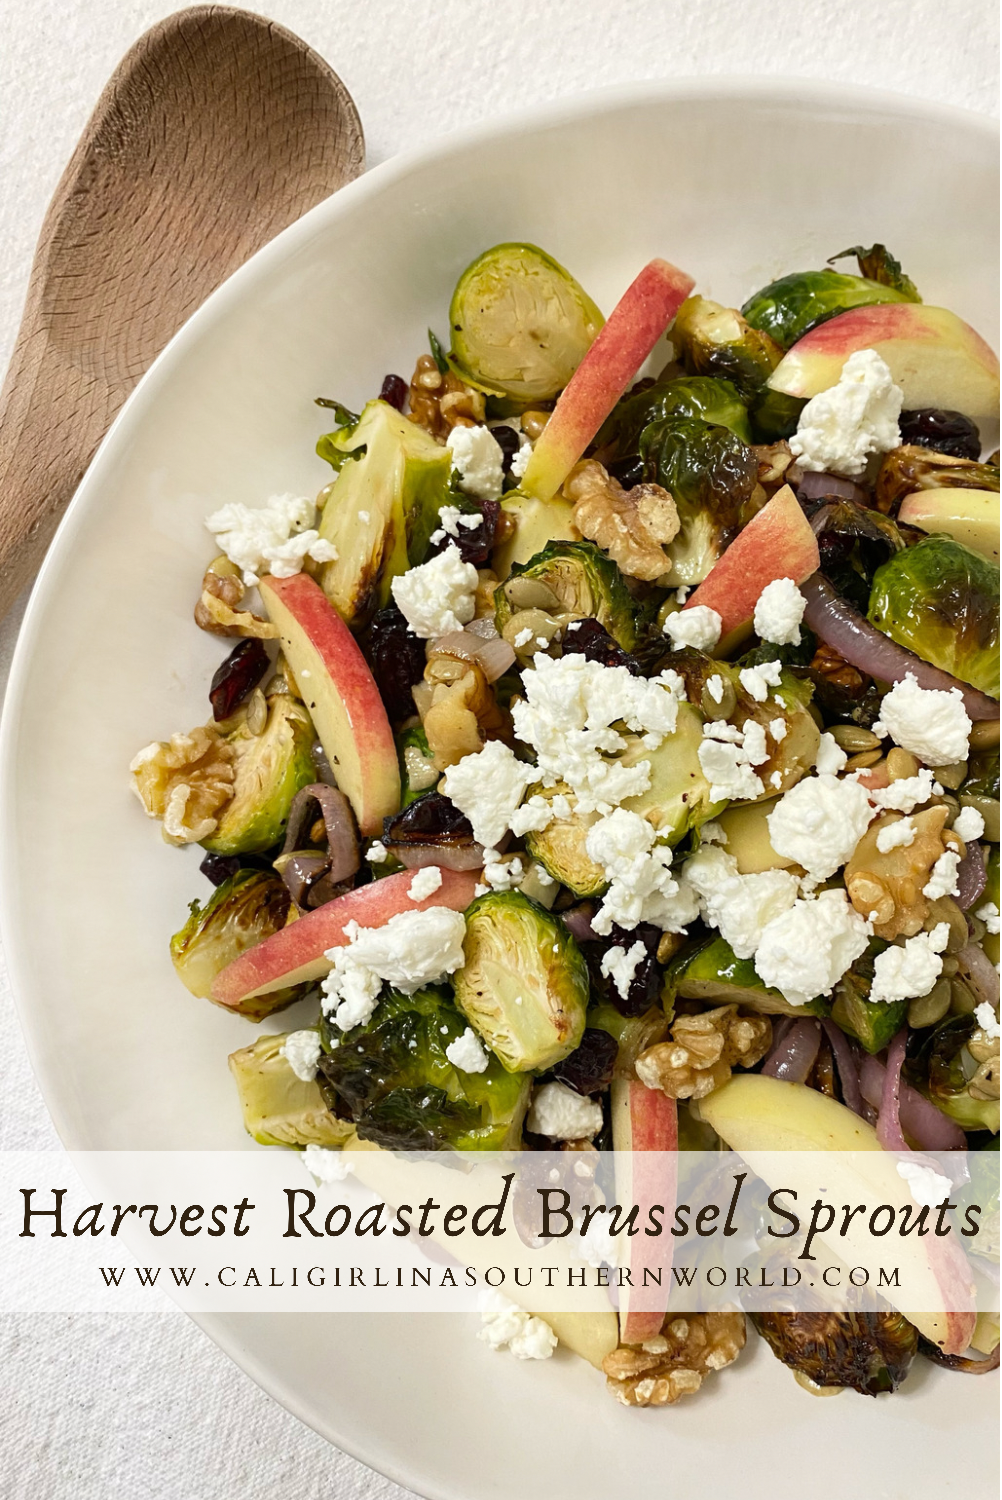 Pinterest Pin for Harvest Roasted Brussel Sprouts